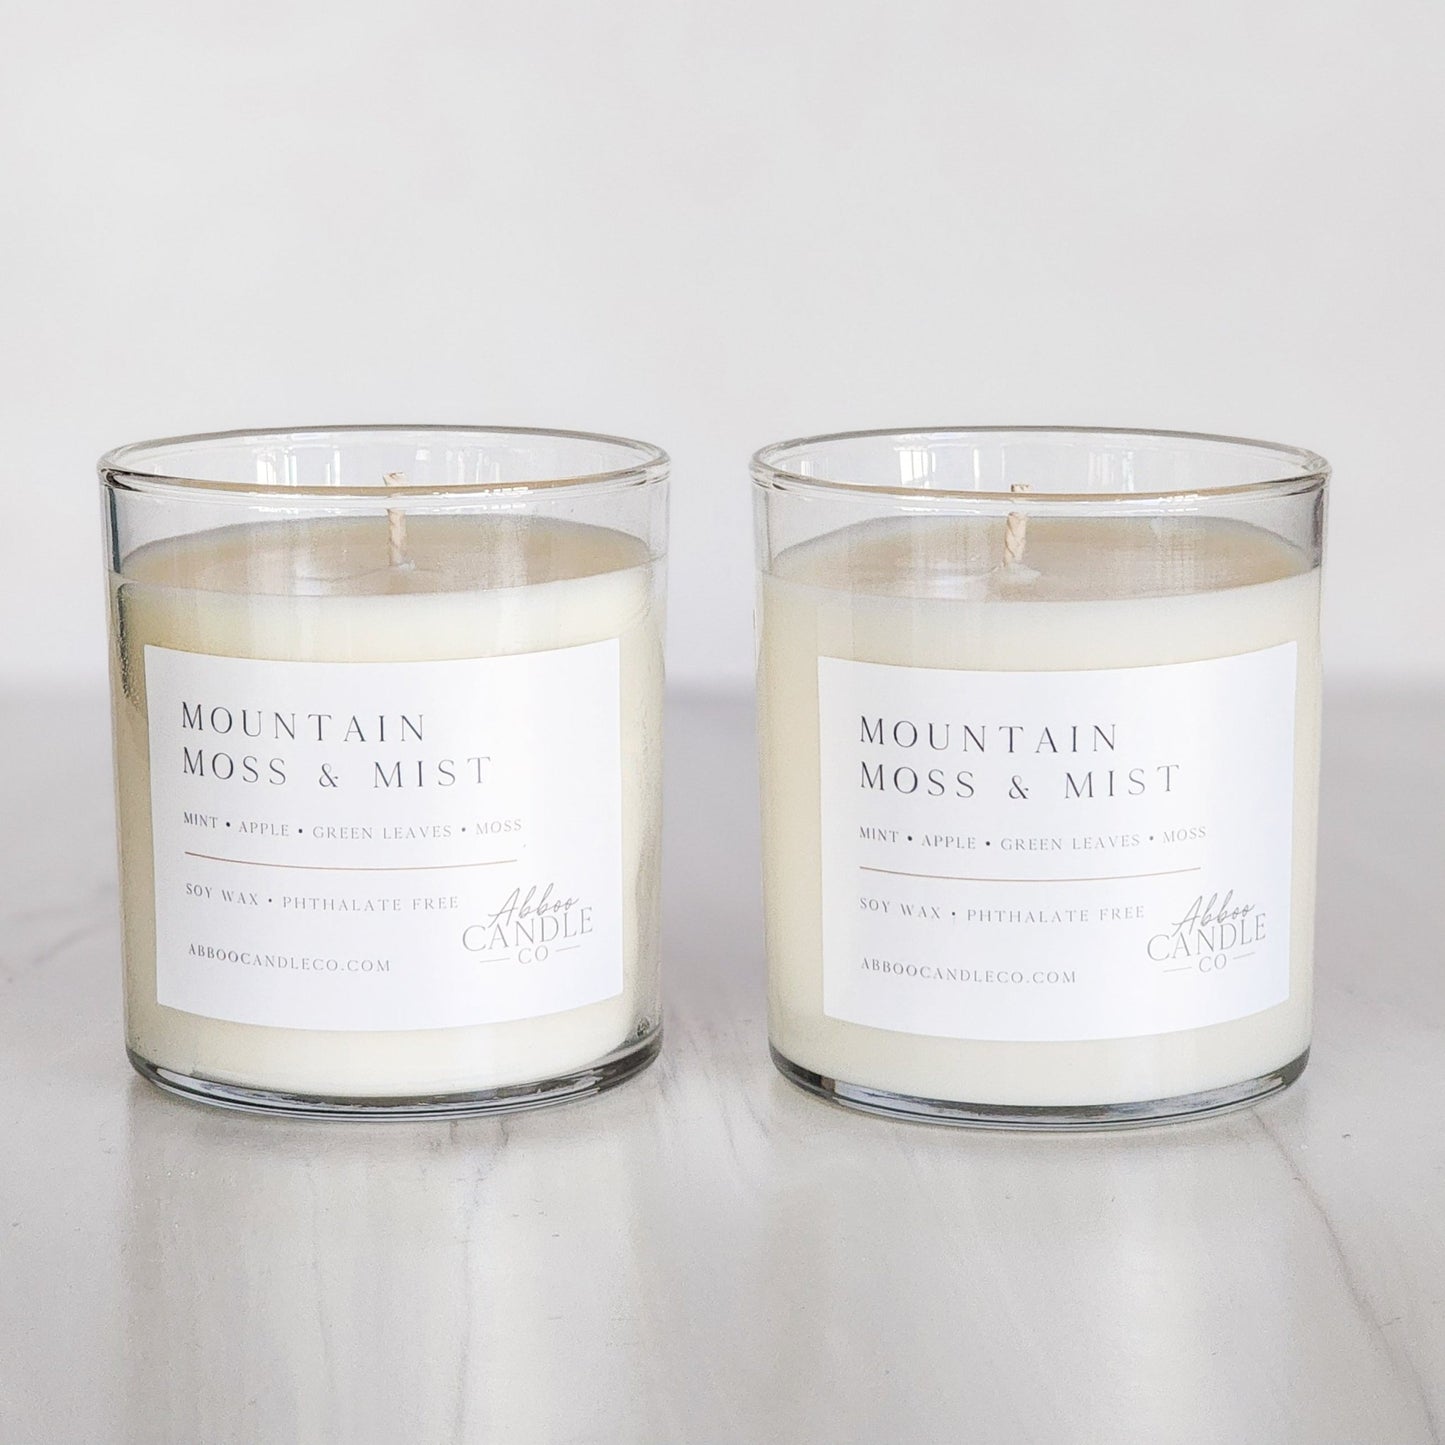 Mountain Moss and Mist Soy Candle Bundle - Abboo Candle Co